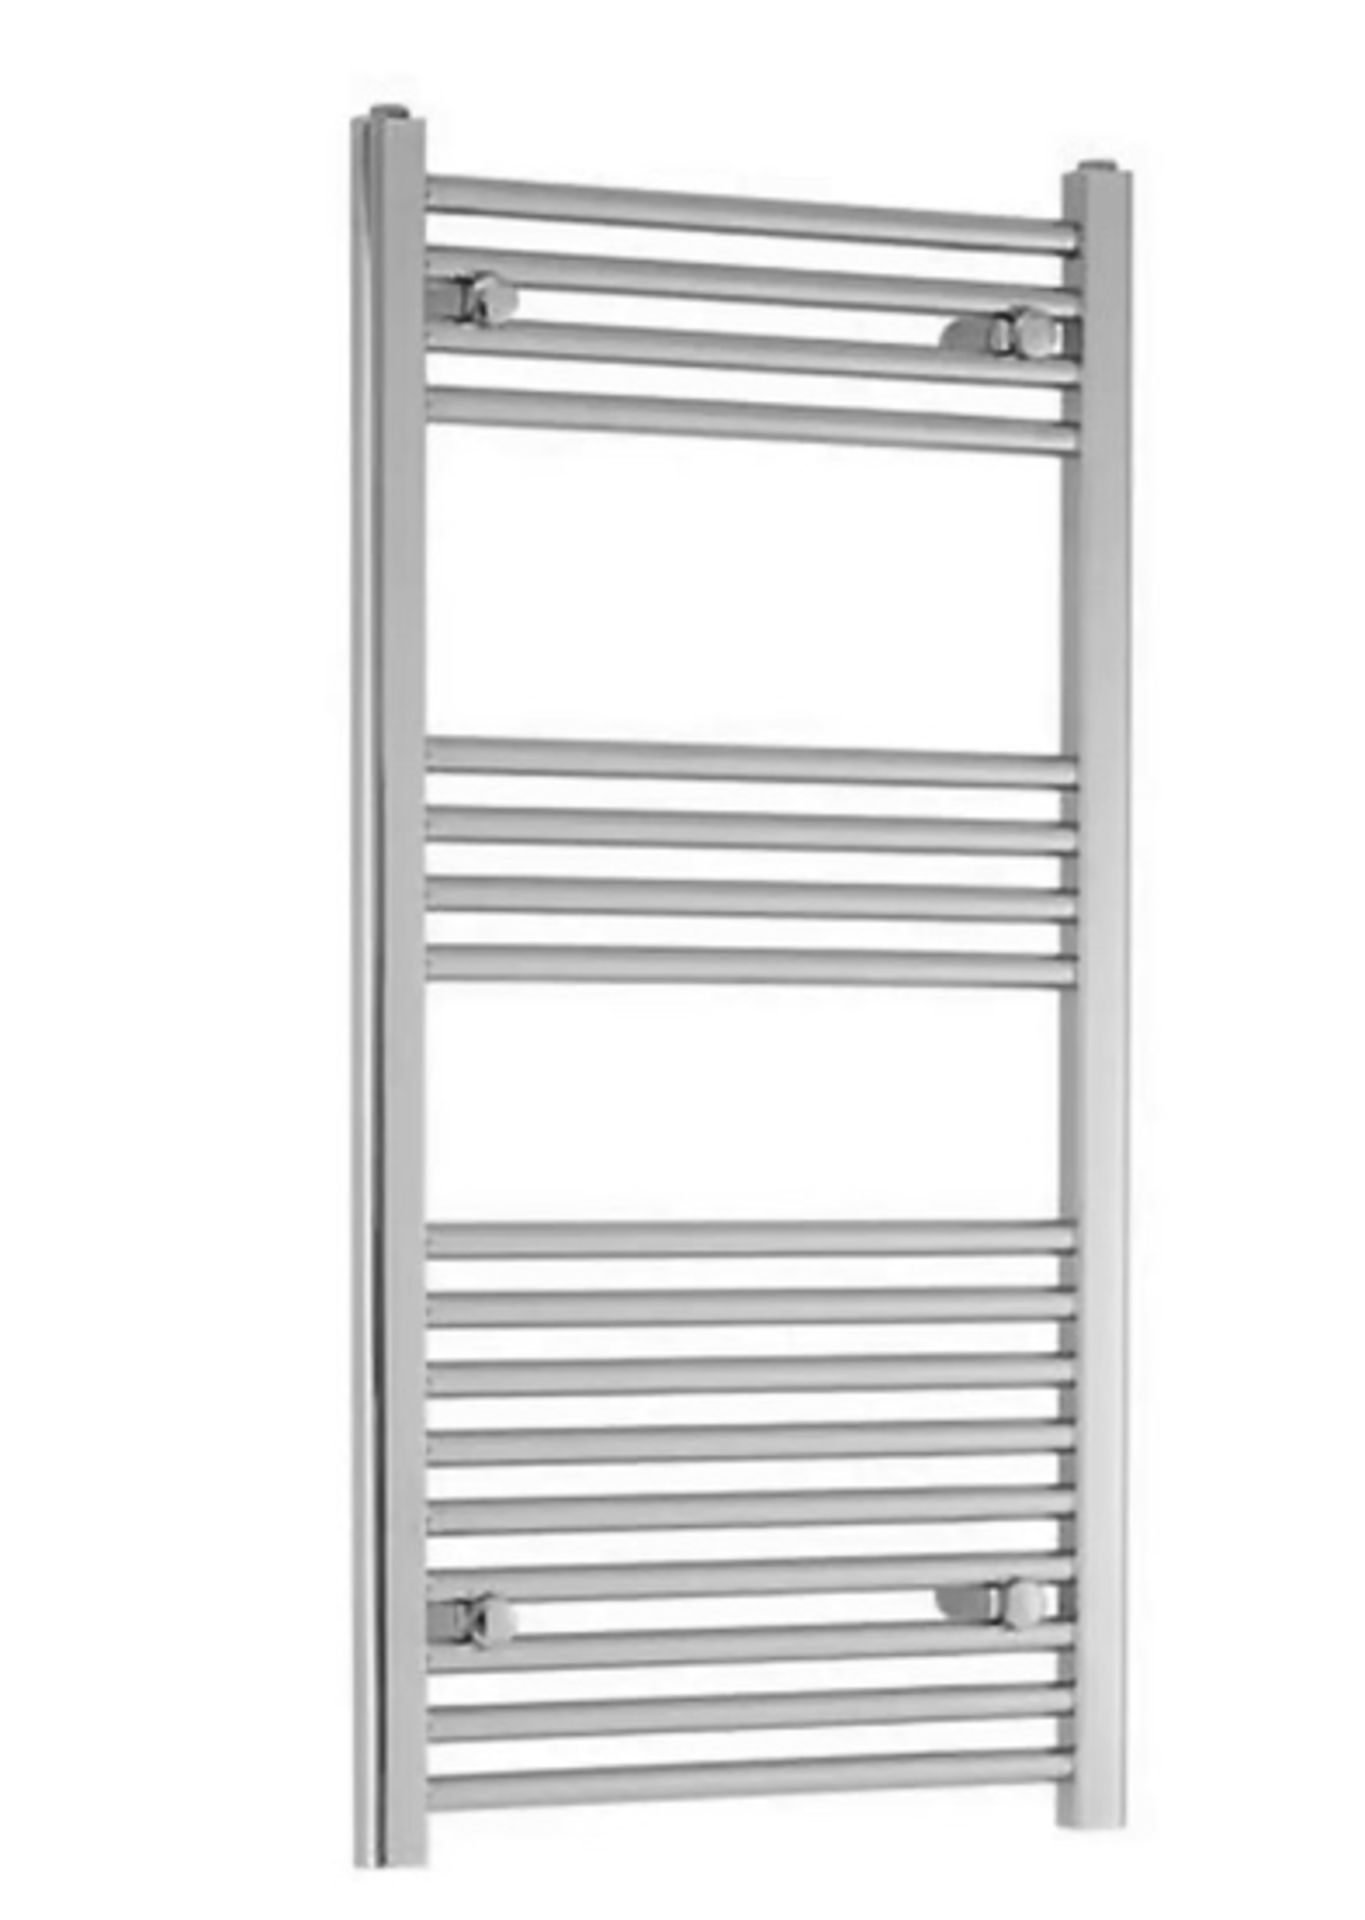 Brand New Boxed Independent Flat Chrome Radiator - 800 x 400mm RRP £100